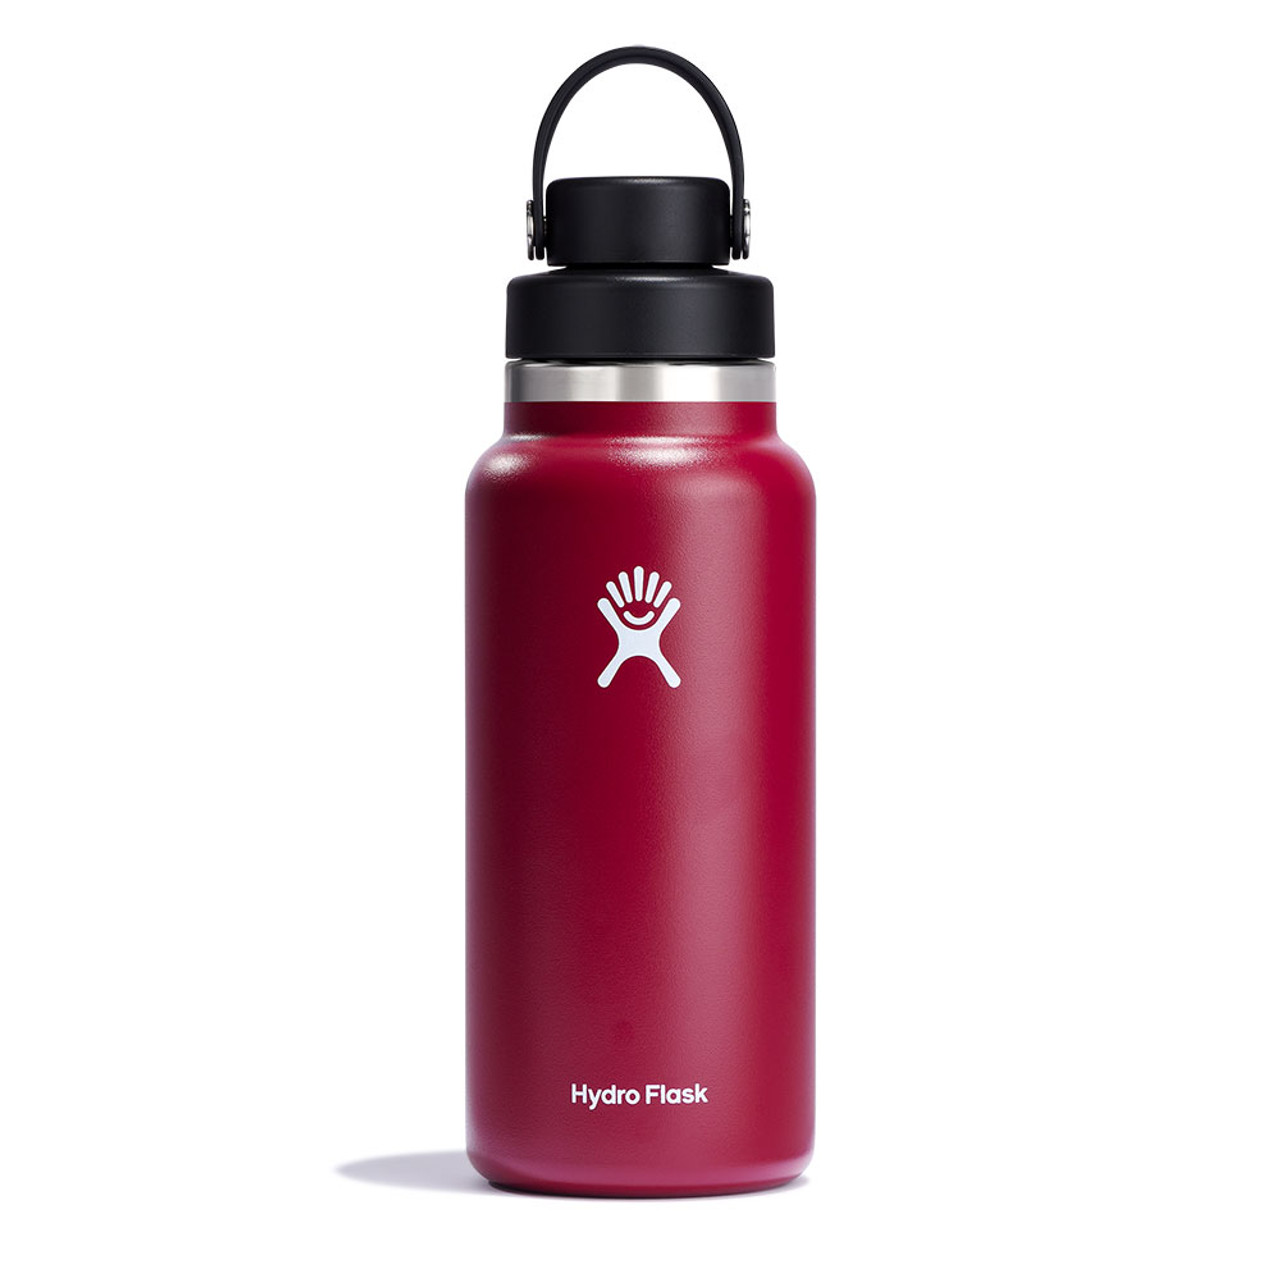  Hydro Flask 20 oz Wide Mouth Sport Cap Stainless